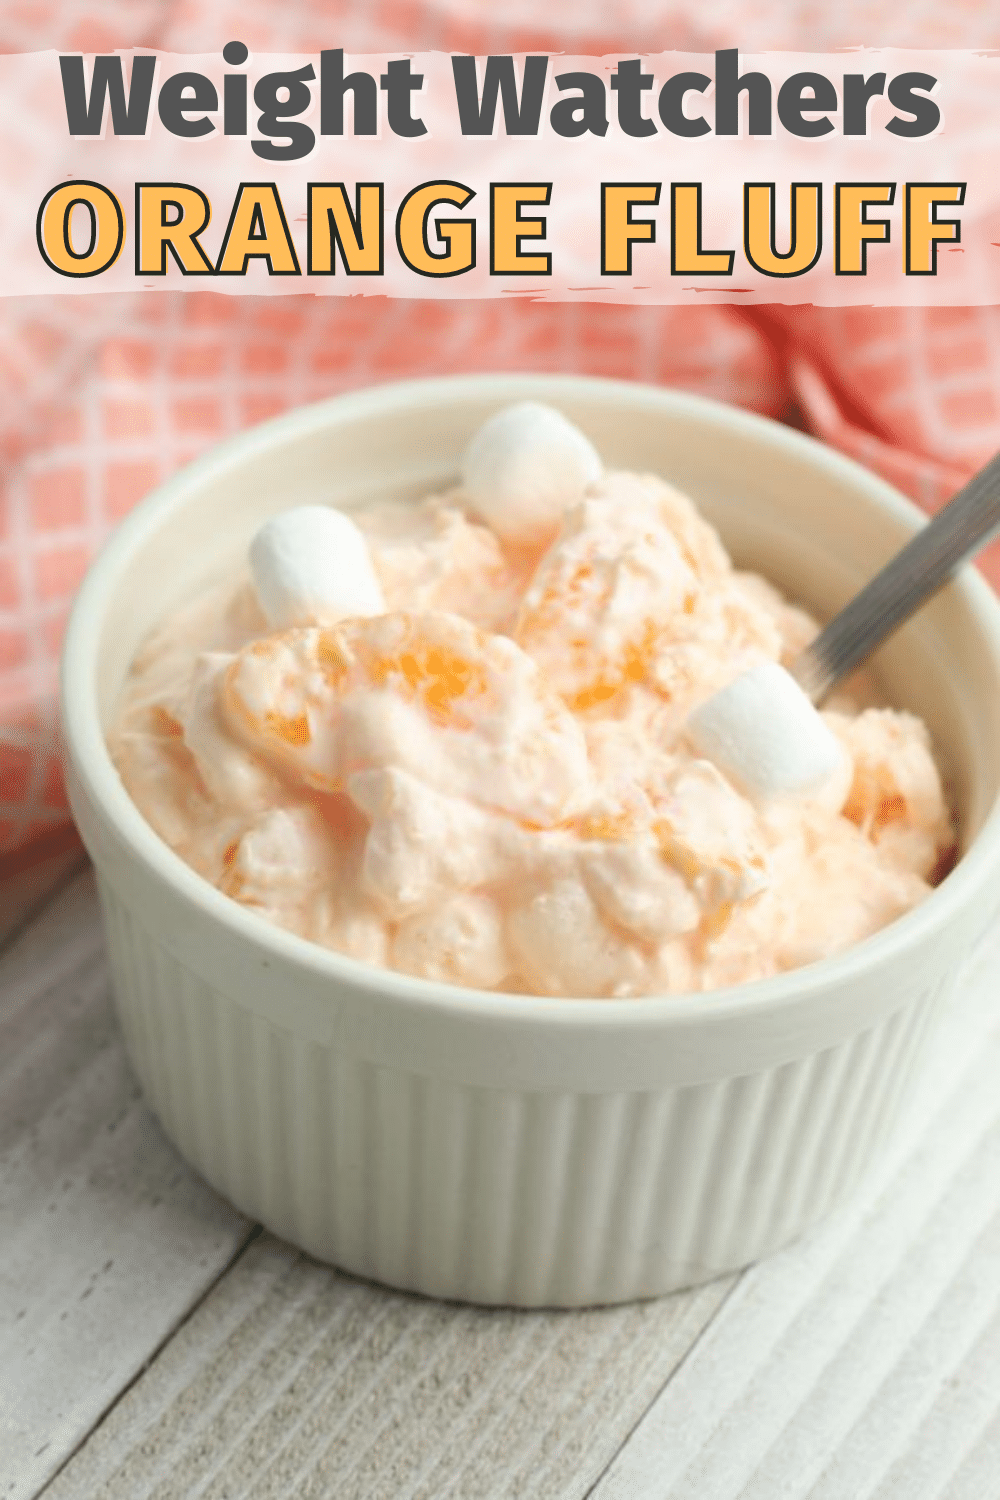 Weight Watchers Orange Fluff is an easy healthier dessert option for spring holidays and picnics. This simple sweet salad is simple to make and is amazing. #ww #weightwatchers #fluff via @wondermomwannab